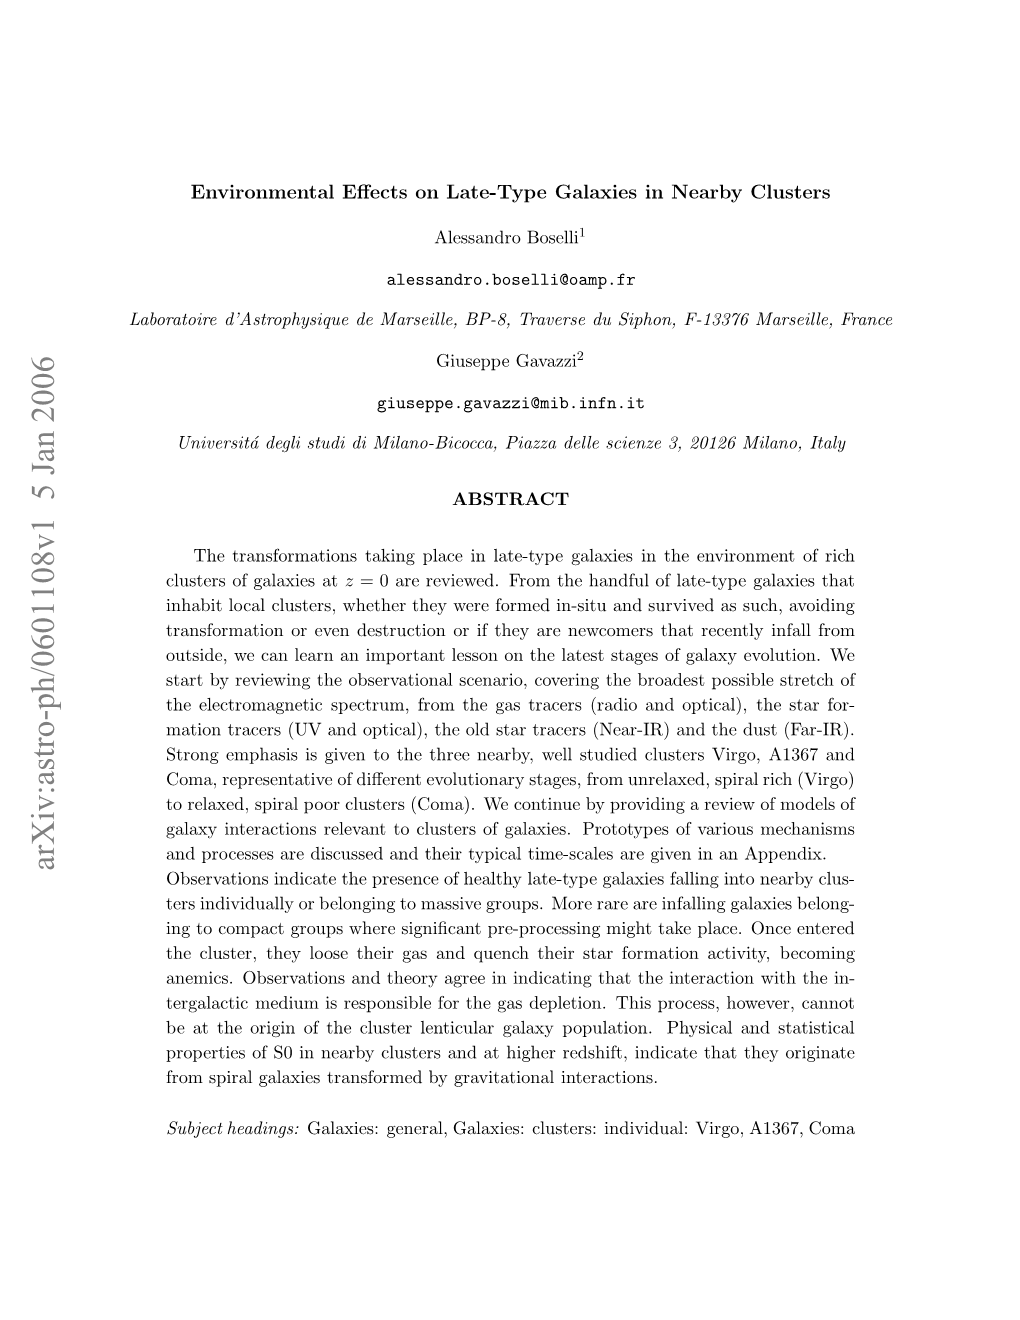 Environmental Effects on Late-Type Galaxies in Nearby Clusters